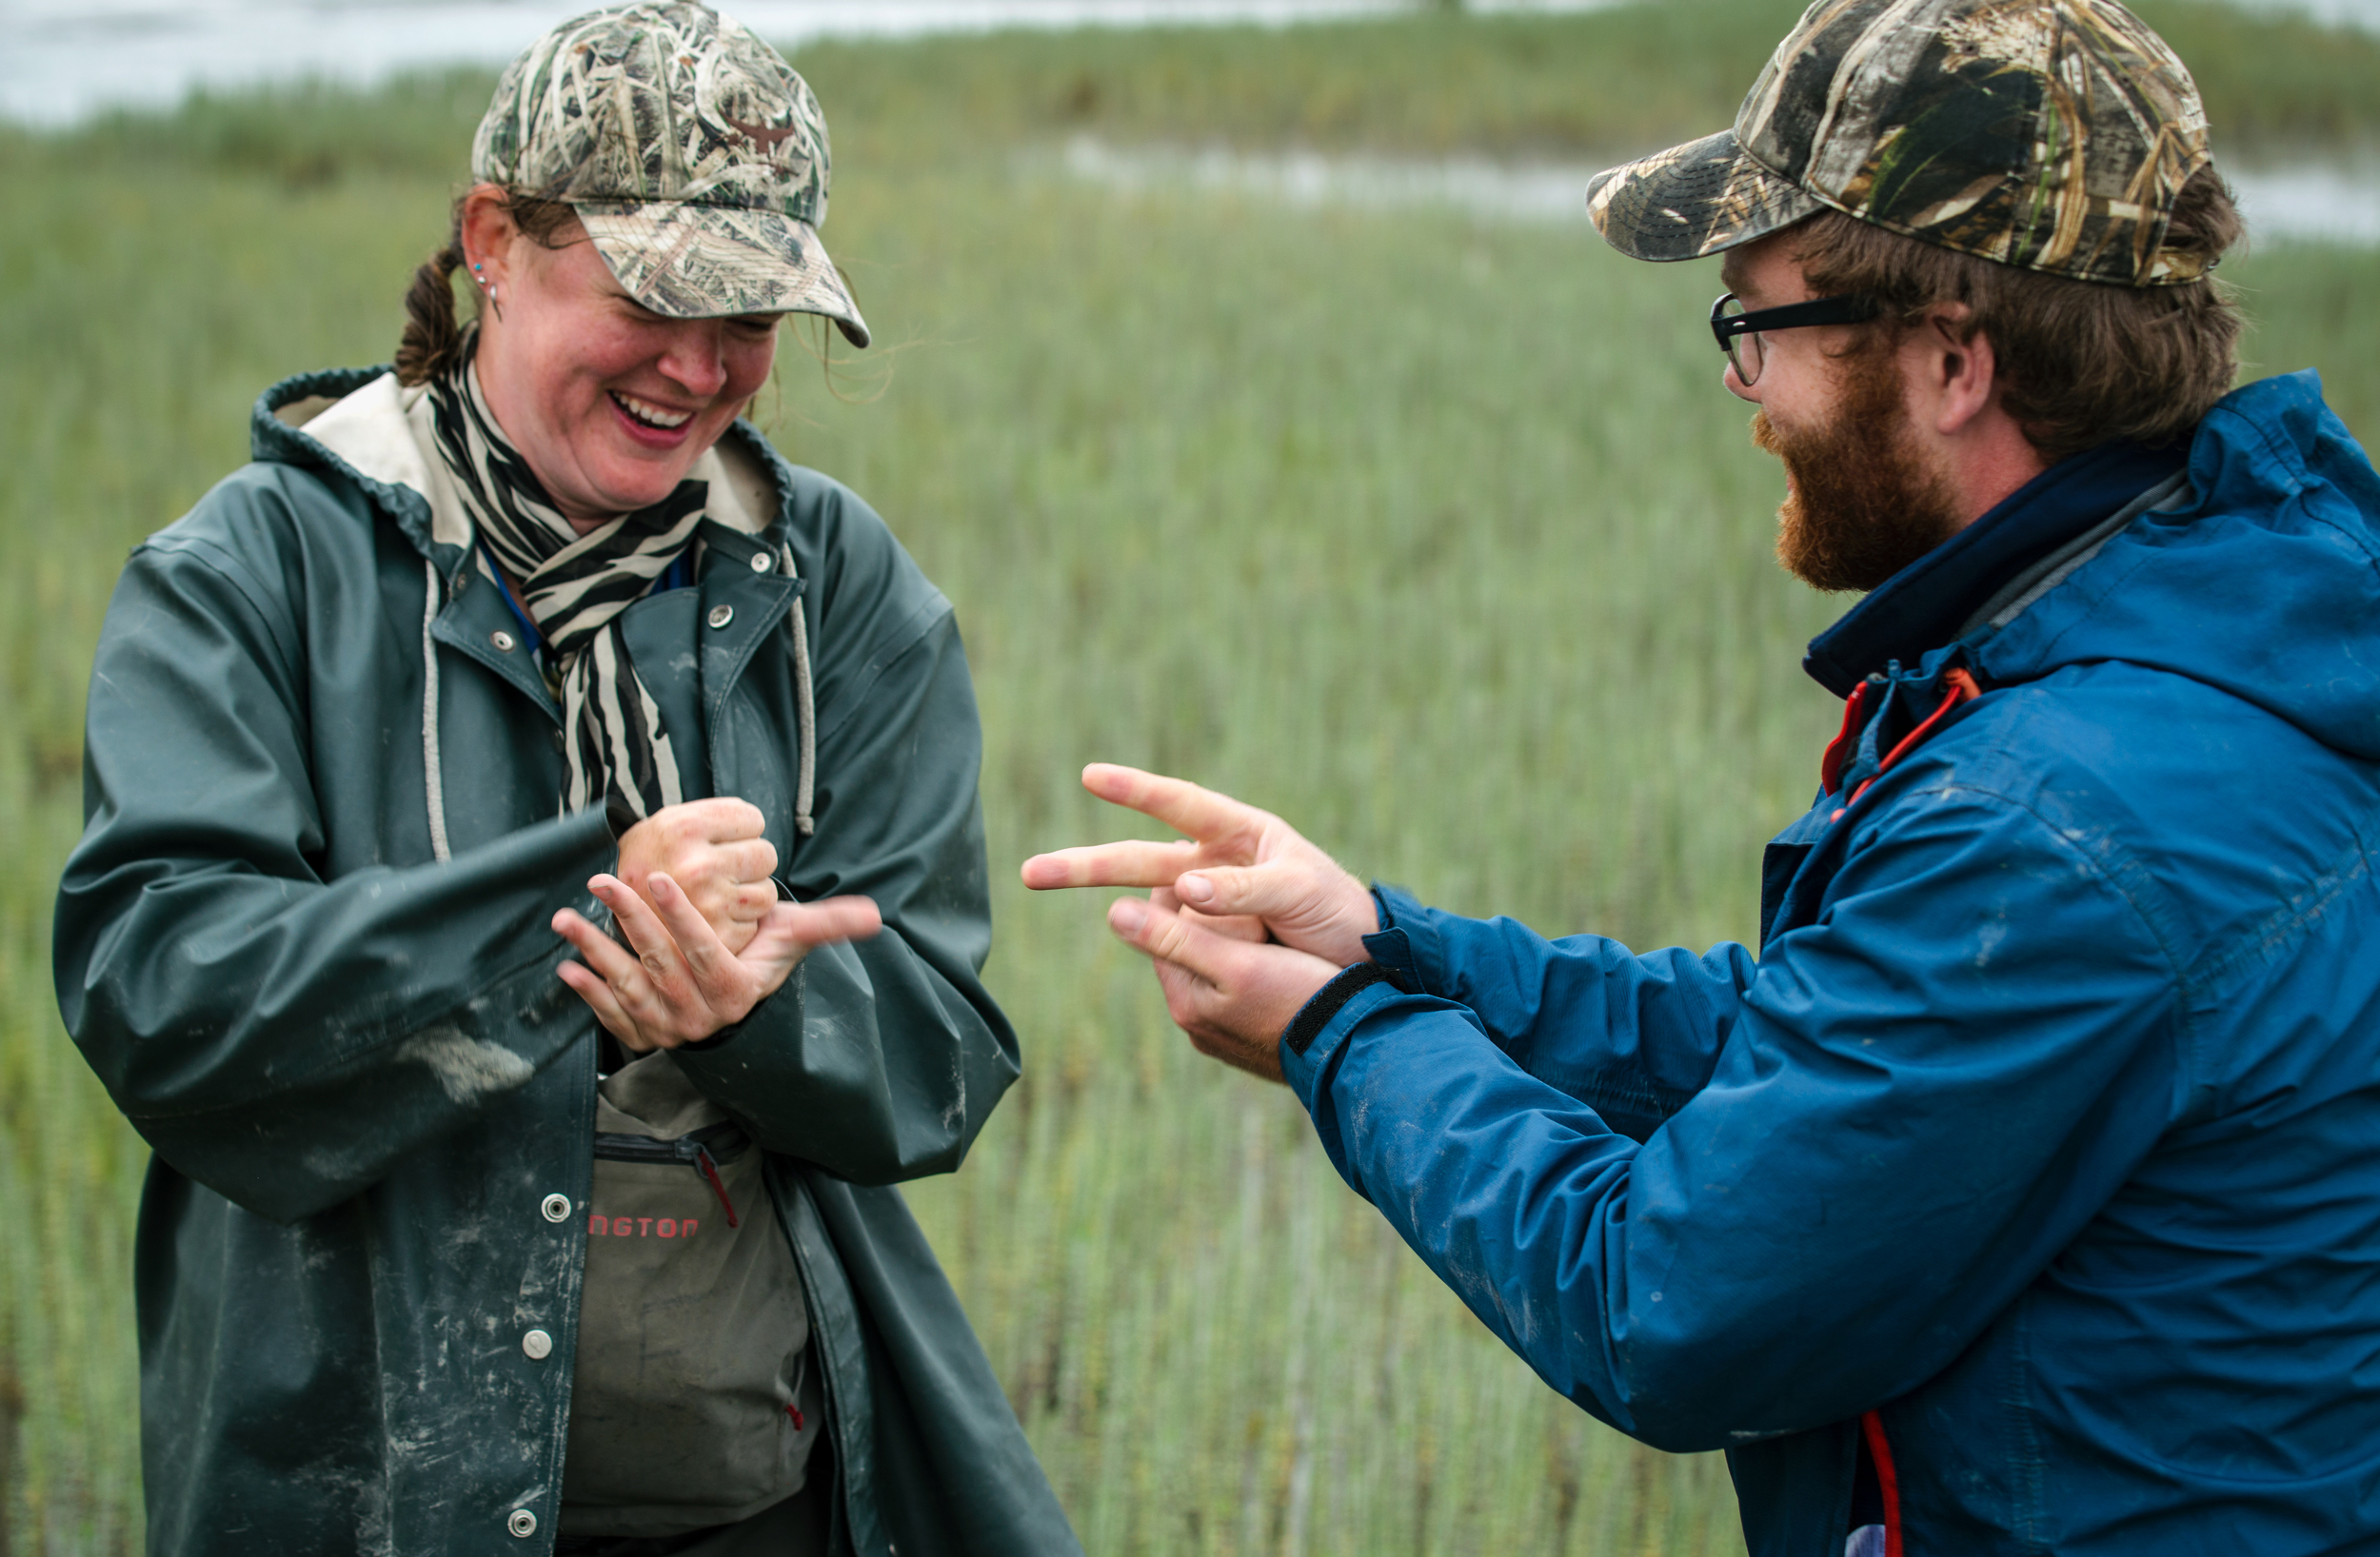  Navigating the field is tough on the body and the mind, but Gabrielson finds joy in her work through the interactions she has with nature and her team. Here, her and an Matt Prinzing, a wildlife intern she has been mentoring, battle it out to see wh